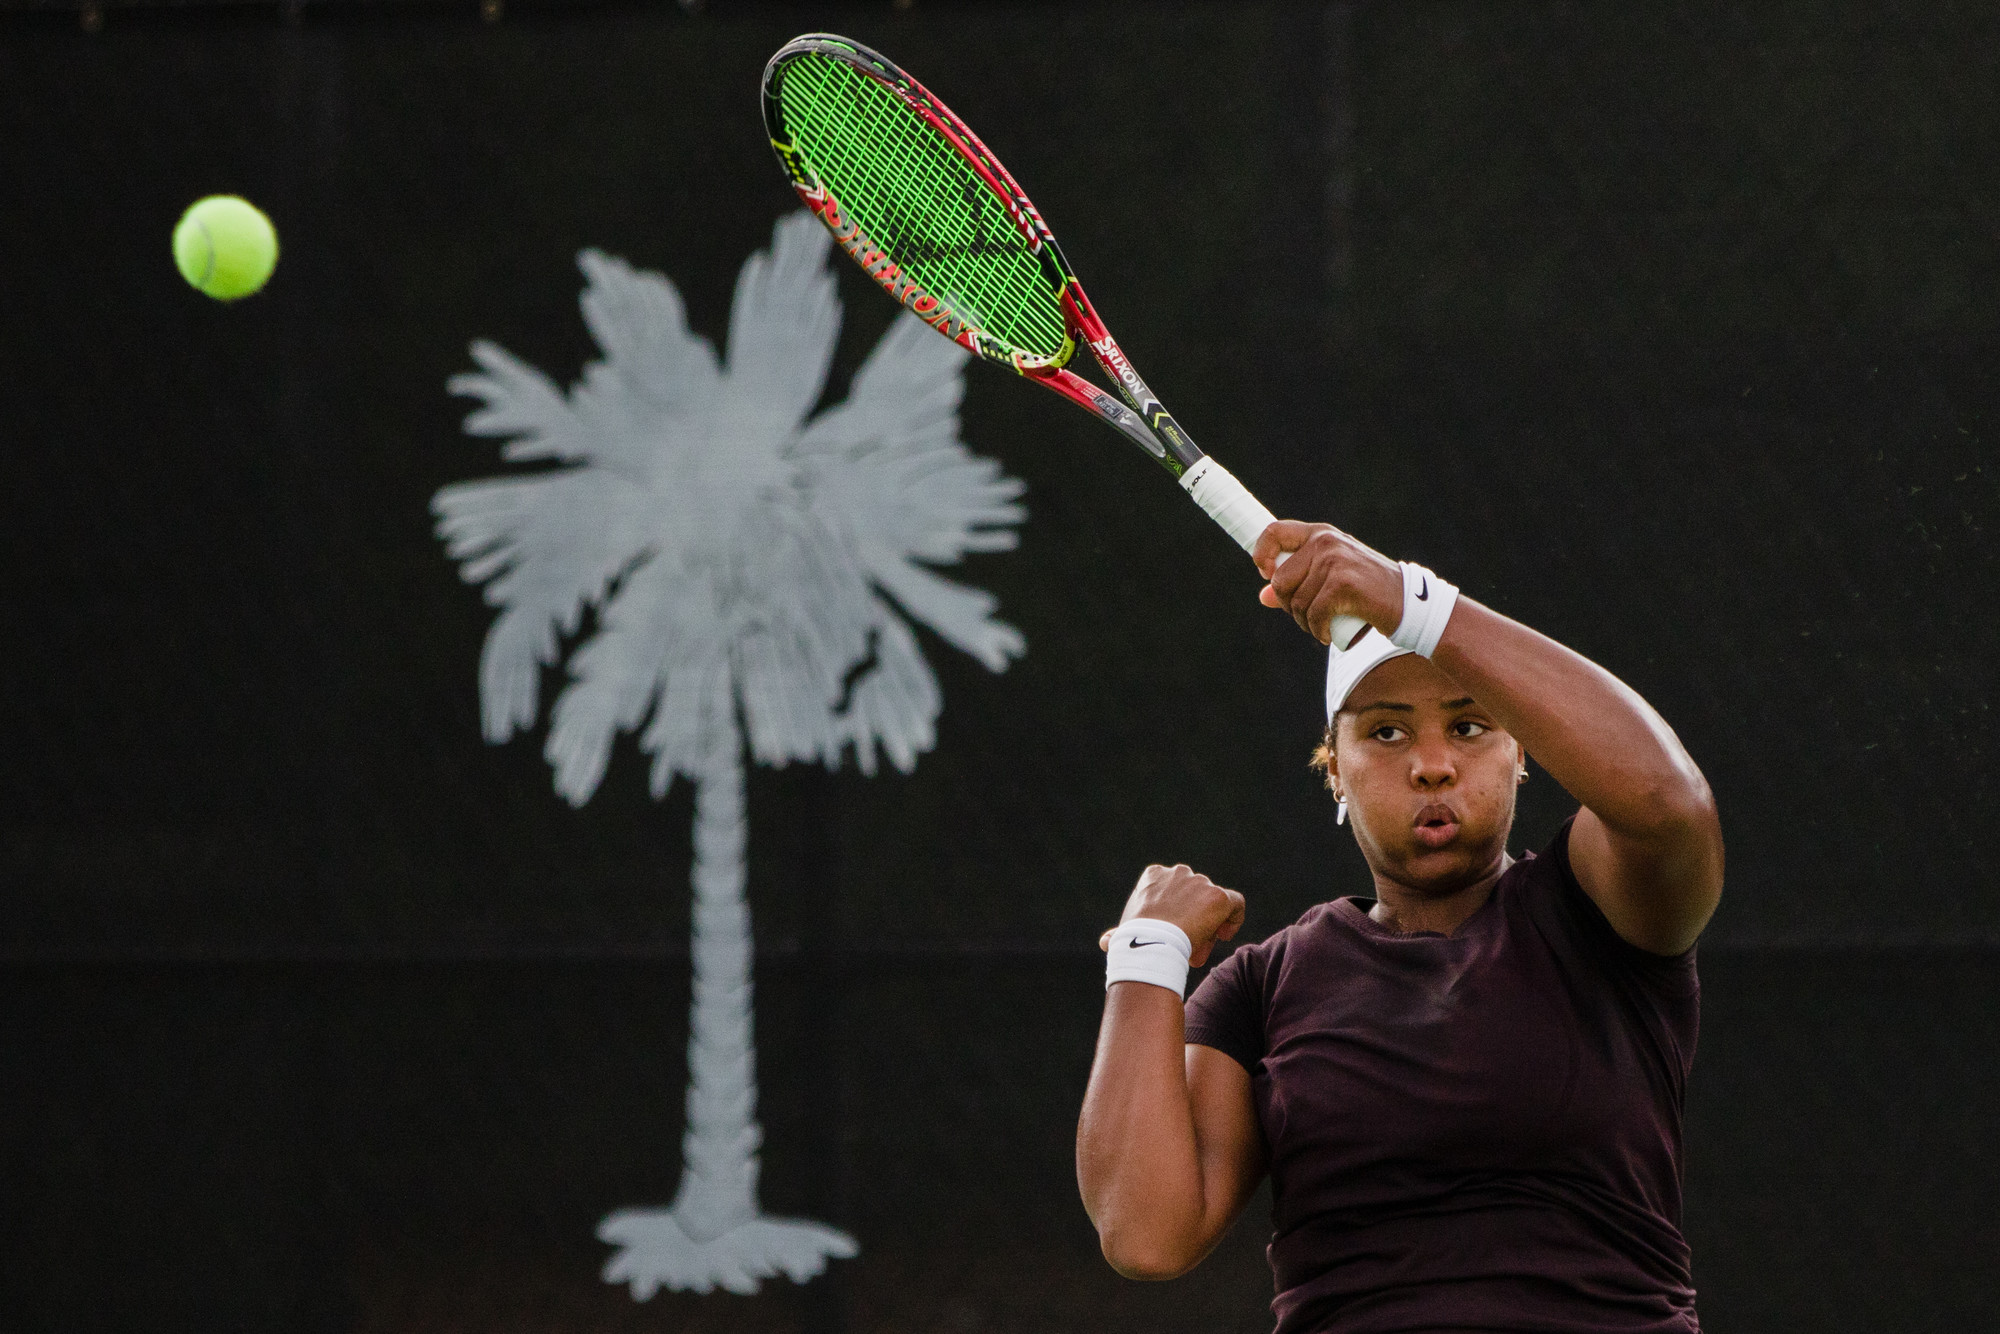 Taylor Townsend, seen here in an earlier match, won the $25,000 USTA Pro Circuit Palmetto Pro Open tennis tournament on Sunday at the Palmetto  Tennis Center when her opponent, second-seeded Alize Lim, had to retire before the final match with muscle-related problems in her back. It is Townsend's second PPO victory.